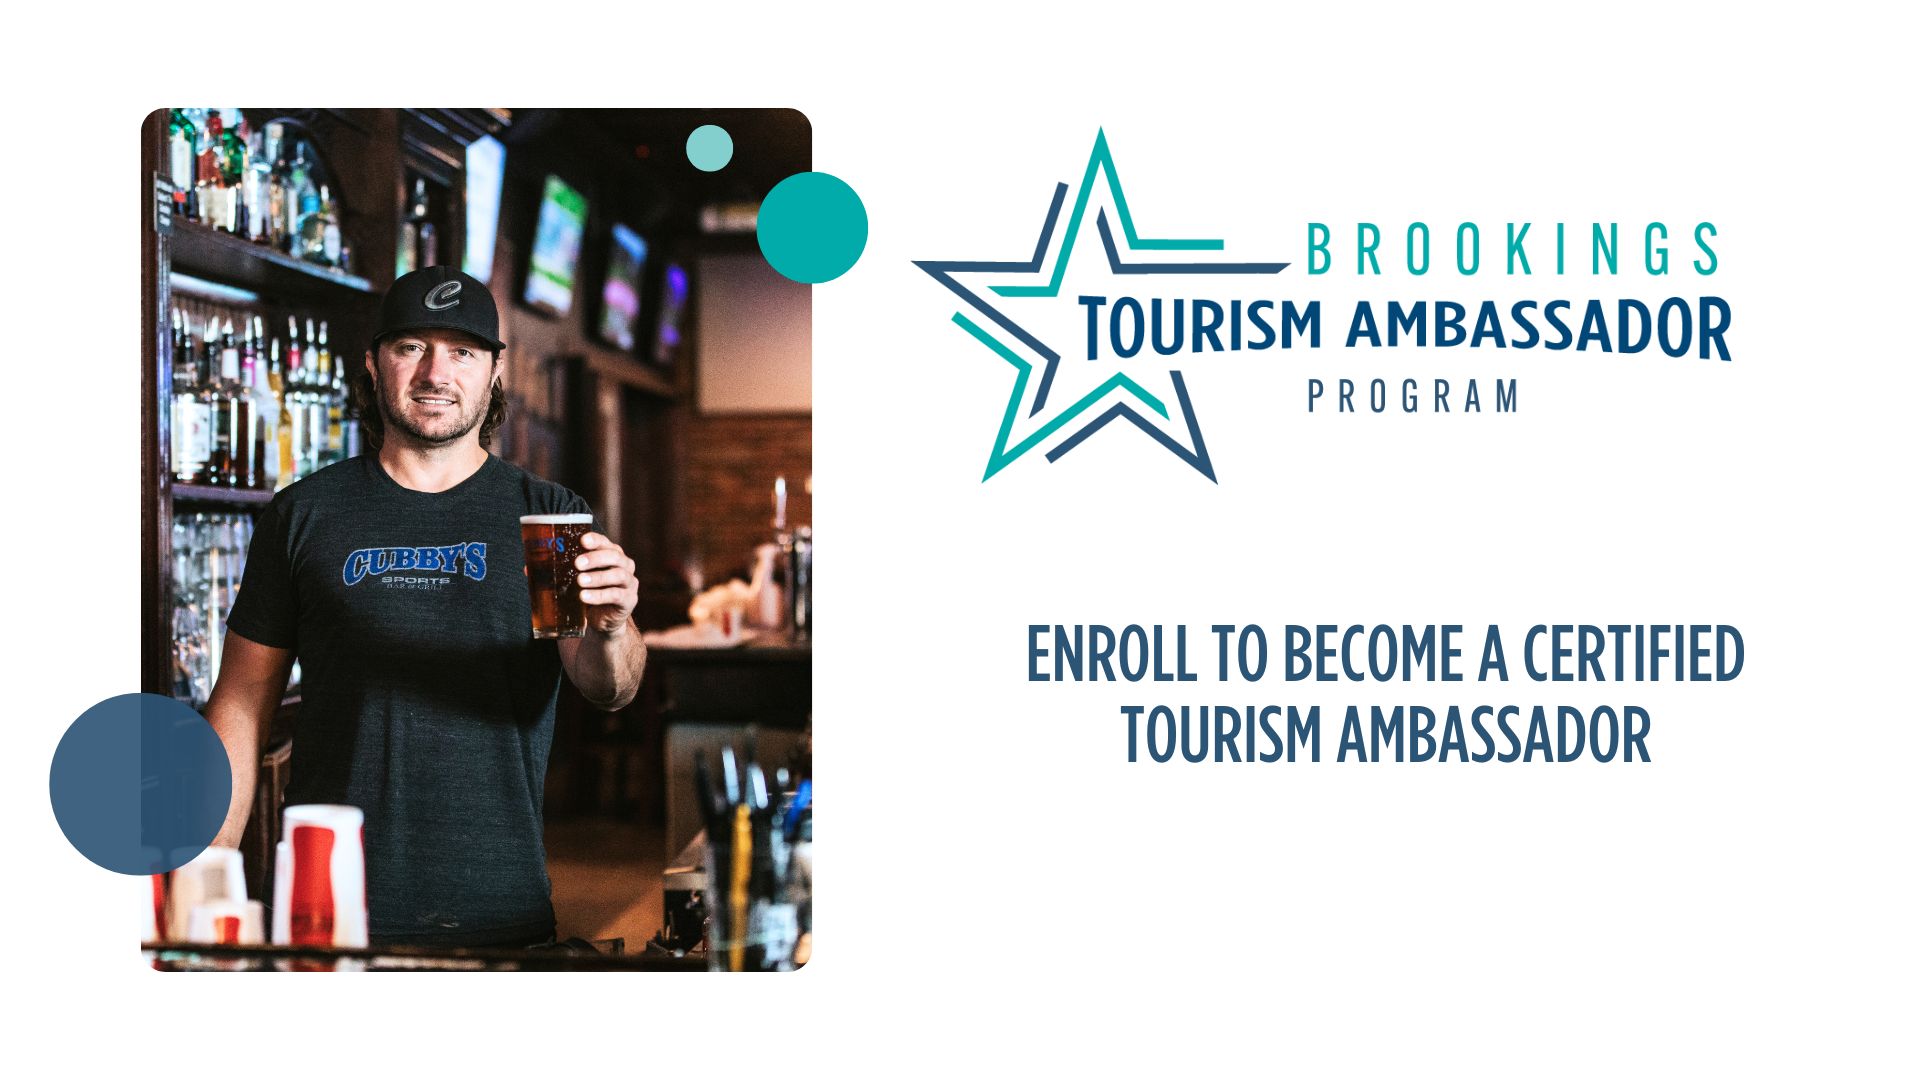 Image on the left features a male employee at Cubby's Sports Bar & Grill holding a drink out to the camera. The logo on the top right reads Brookings Tourism Ambassador Program. Under the logo the text reads "enroll to become a certified tourism ambassador".